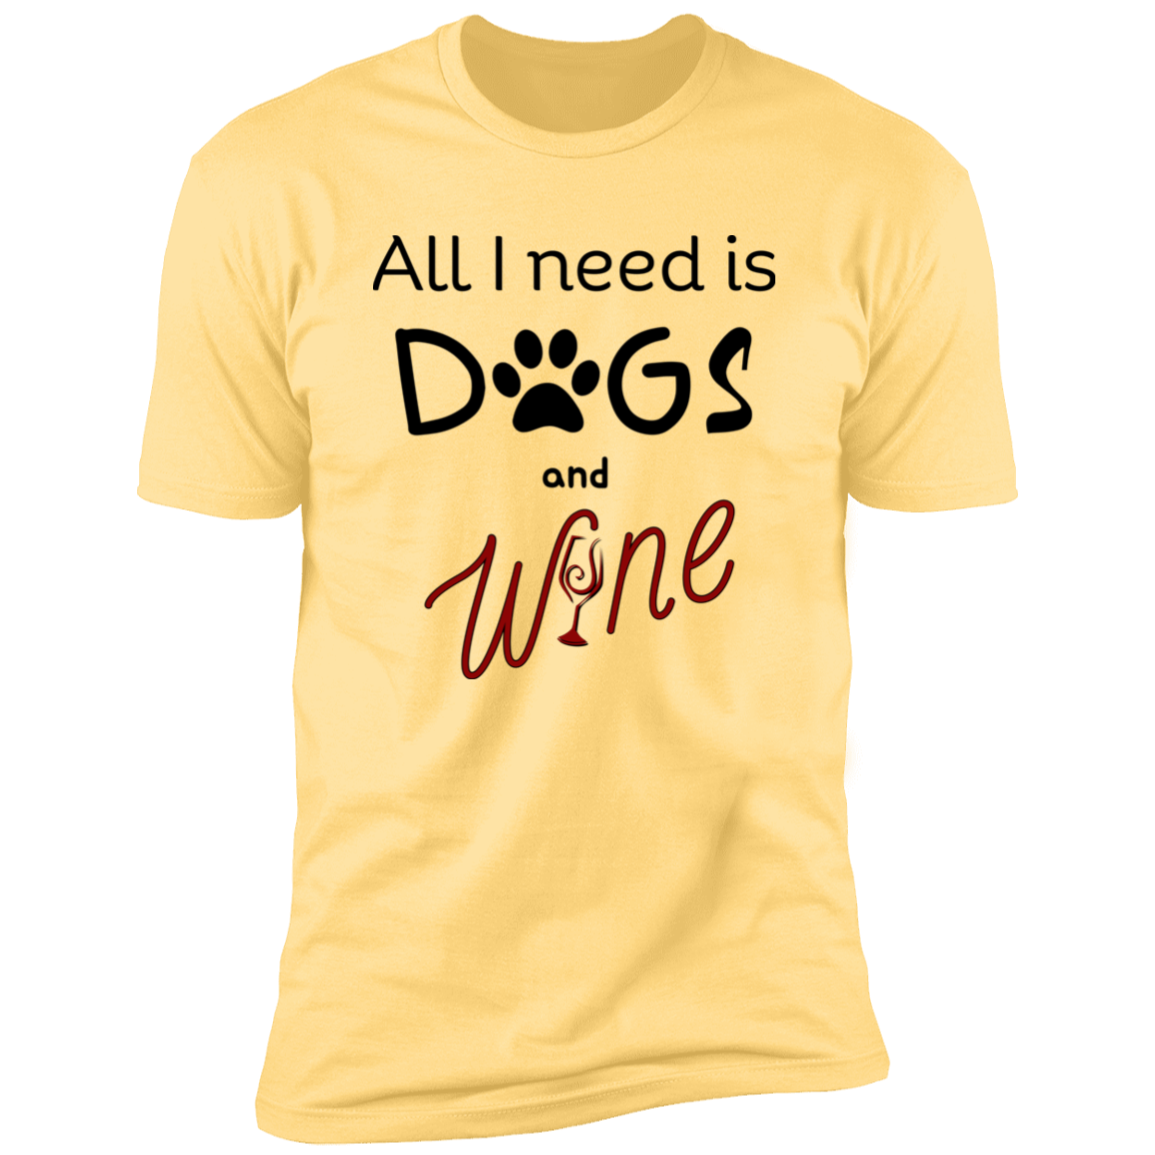 All I Need is Dogs and Wine T-shirt, Dog Shirt for humans, in banana Cream